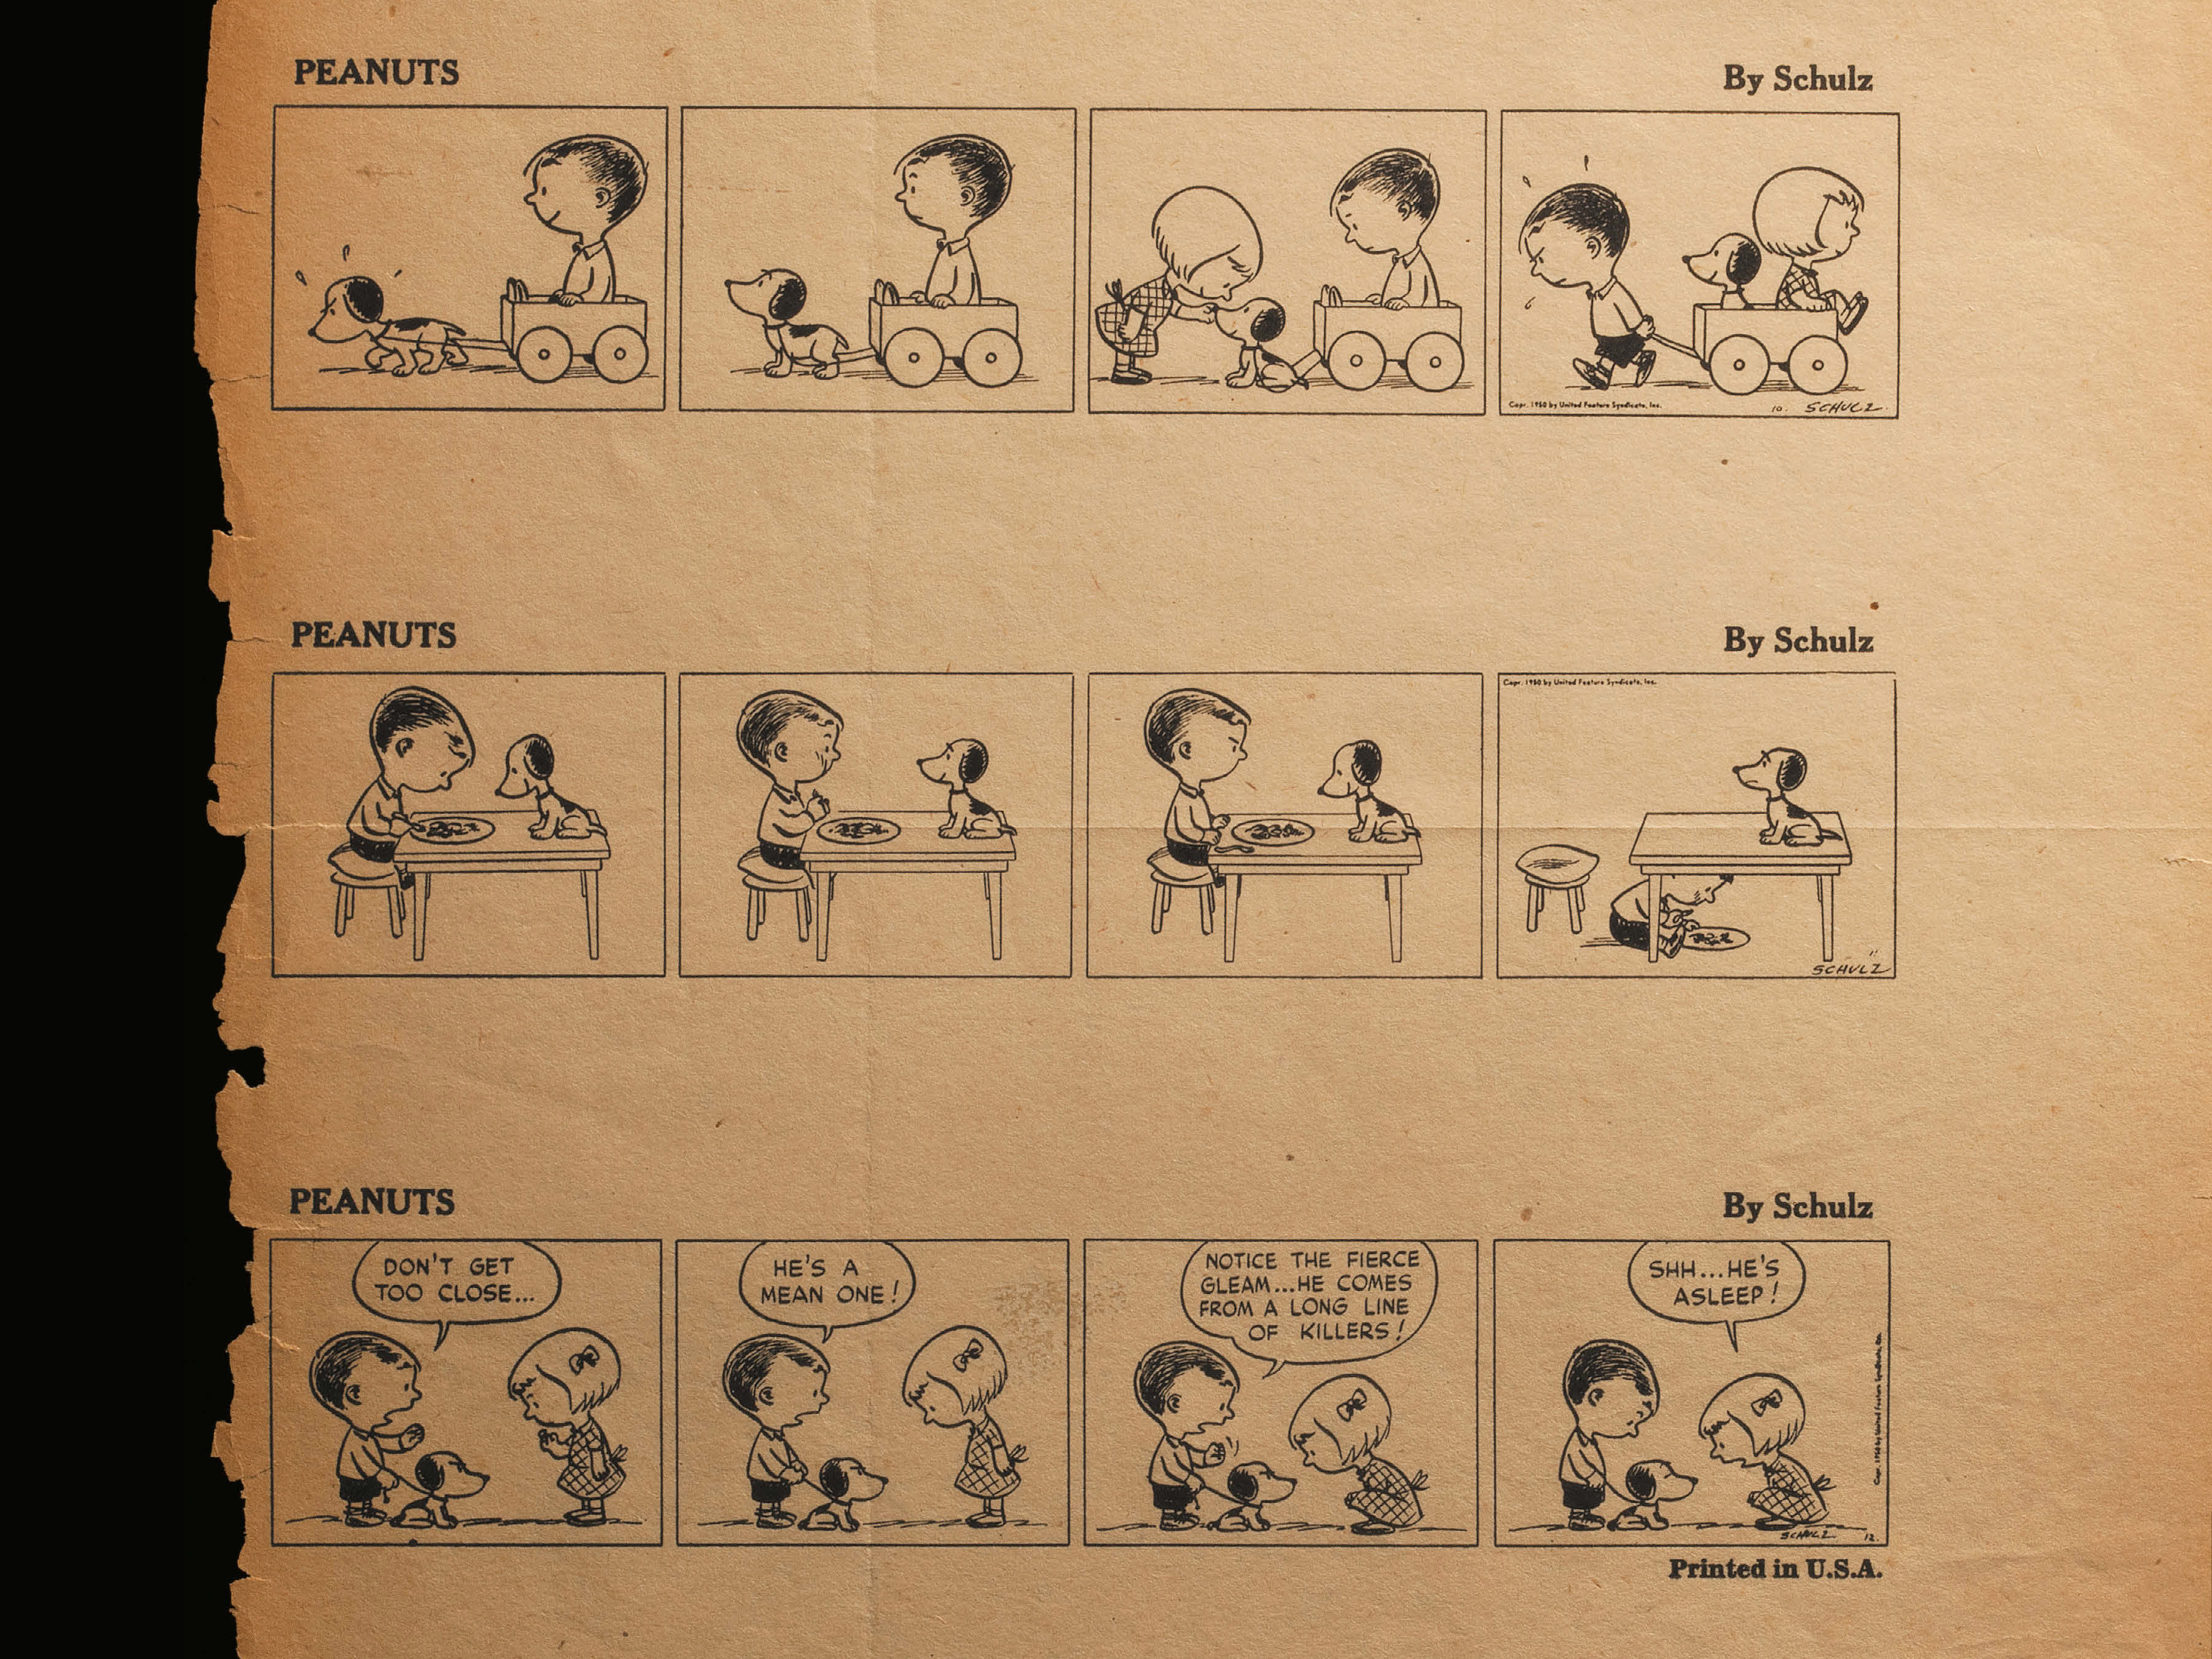 Read online Only What's Necessary: Charles M. Schulz and the Art of Peanuts comic -  Issue # TPB (Part 1) - 66